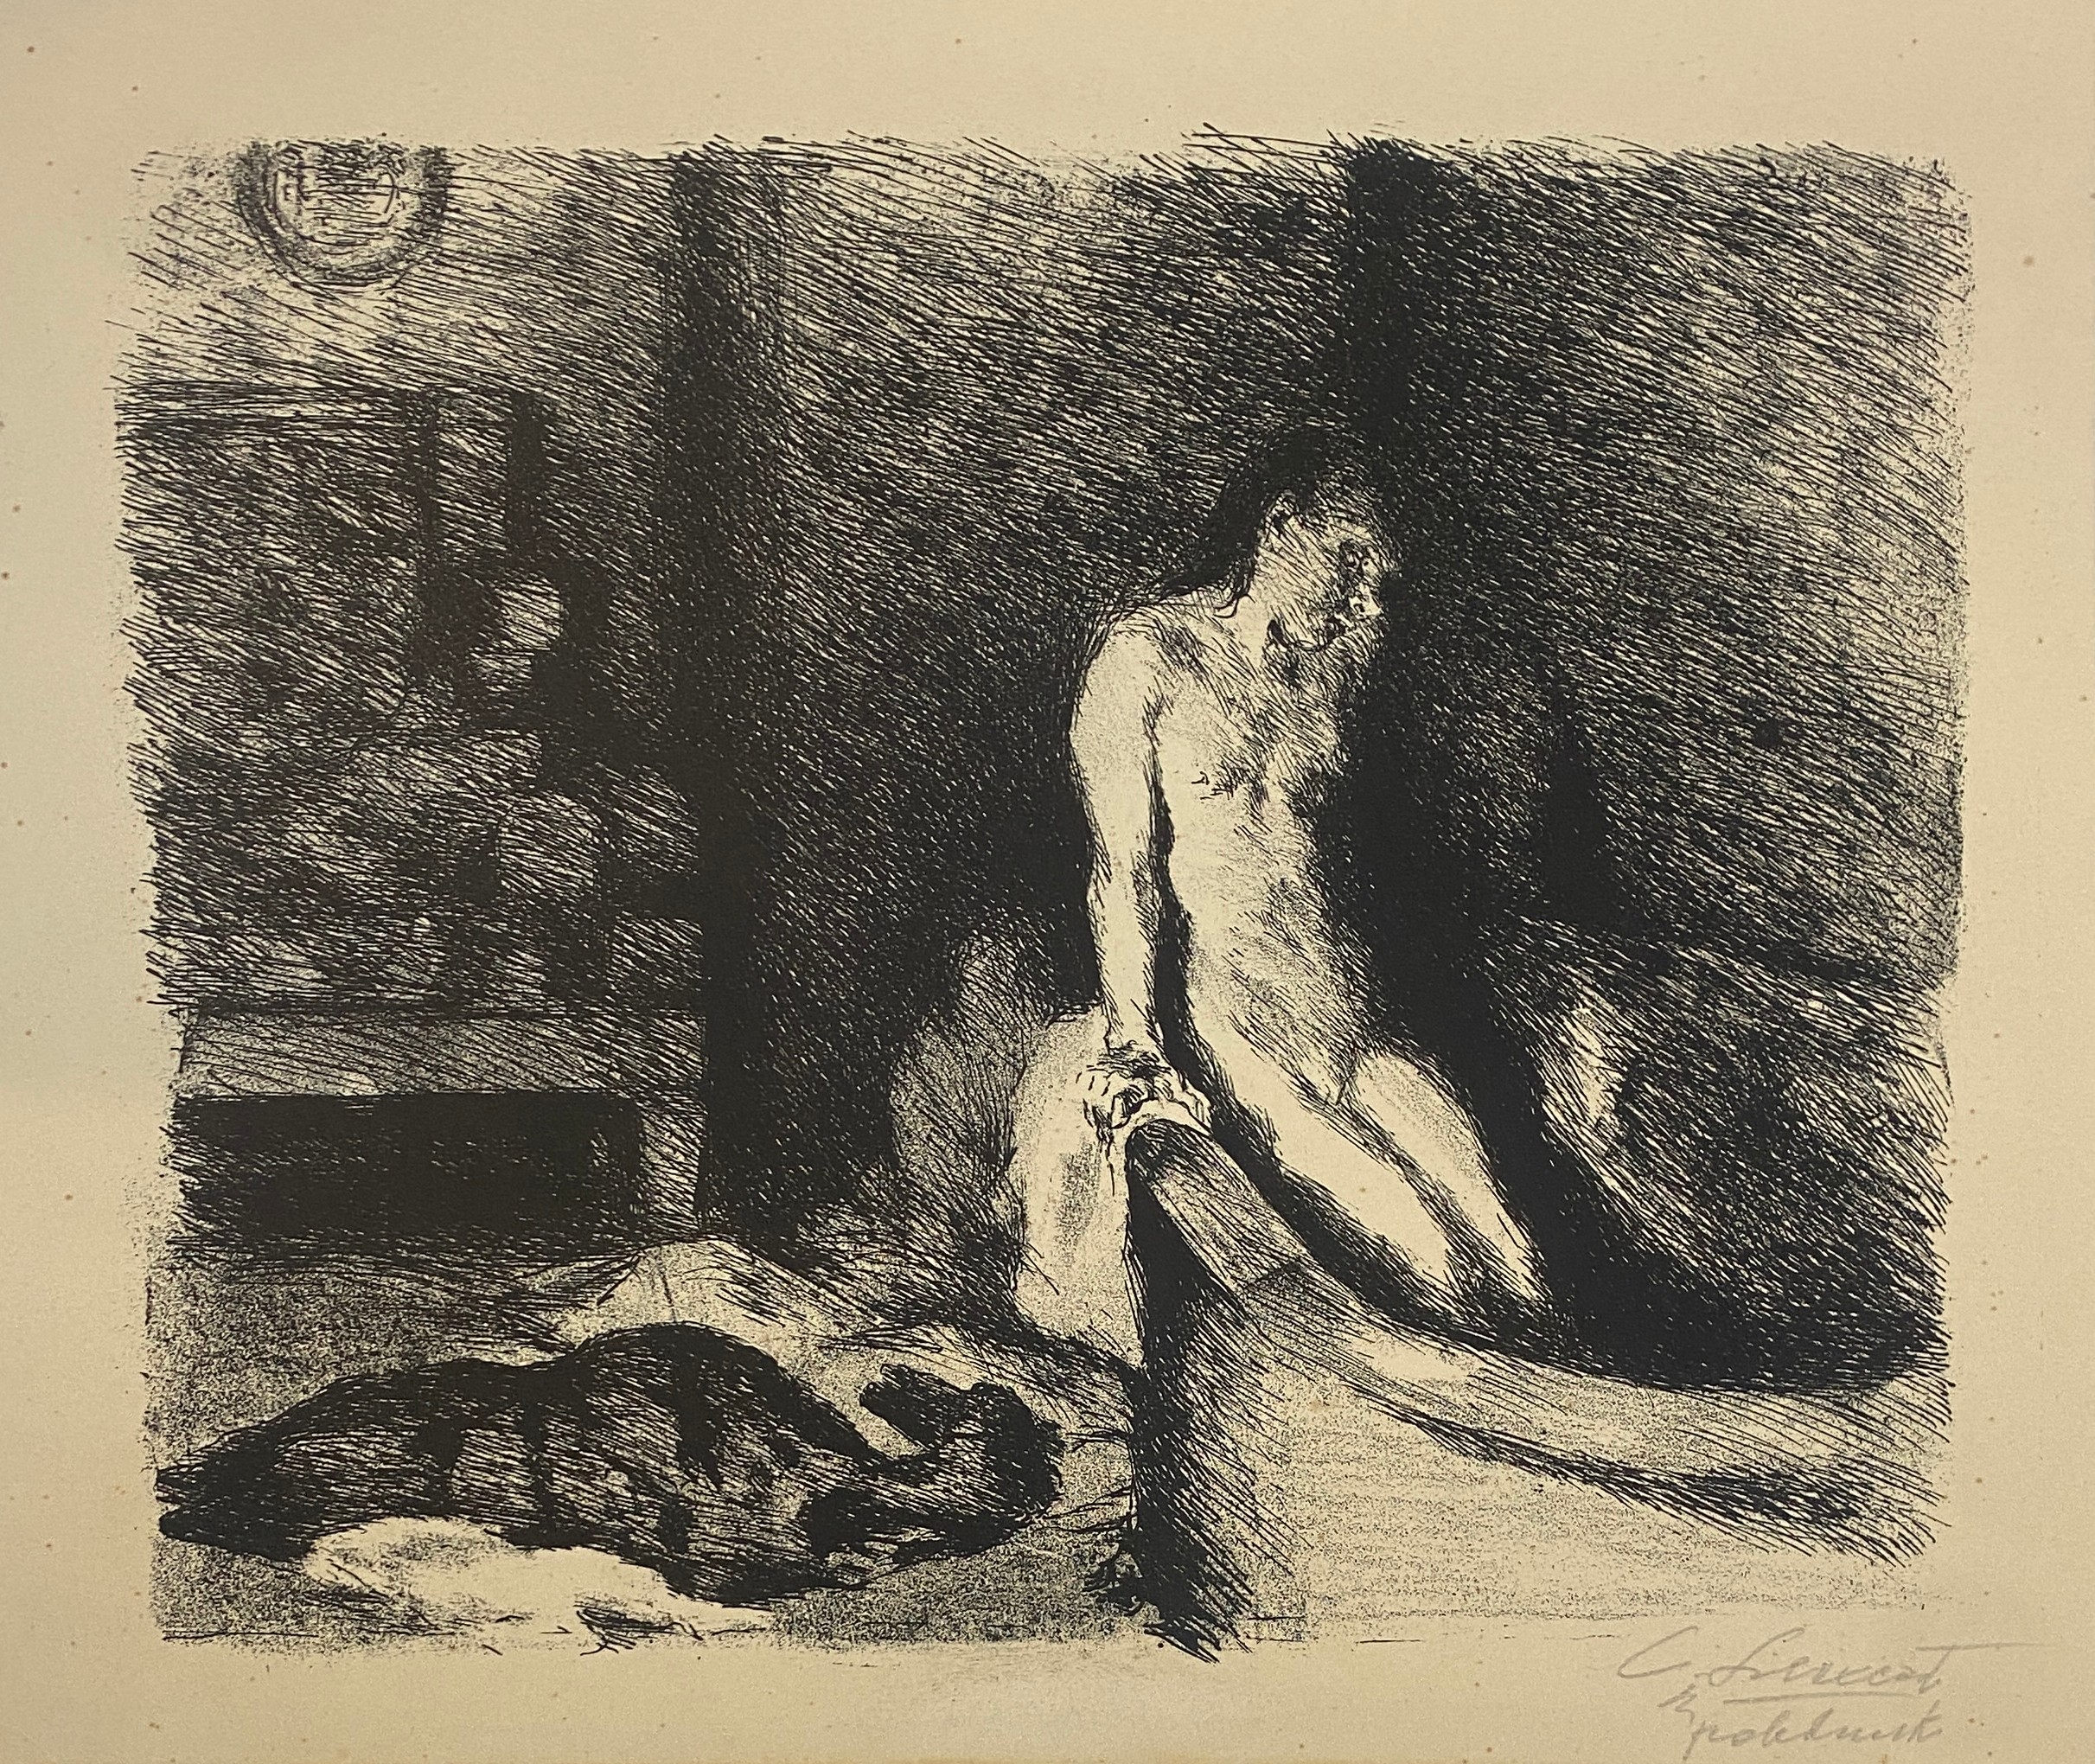 Clara Siewert (German, 1862-1945), 'Junges Mädchen', 1908, signed in pencil lower right, the sheet - Image 2 of 2